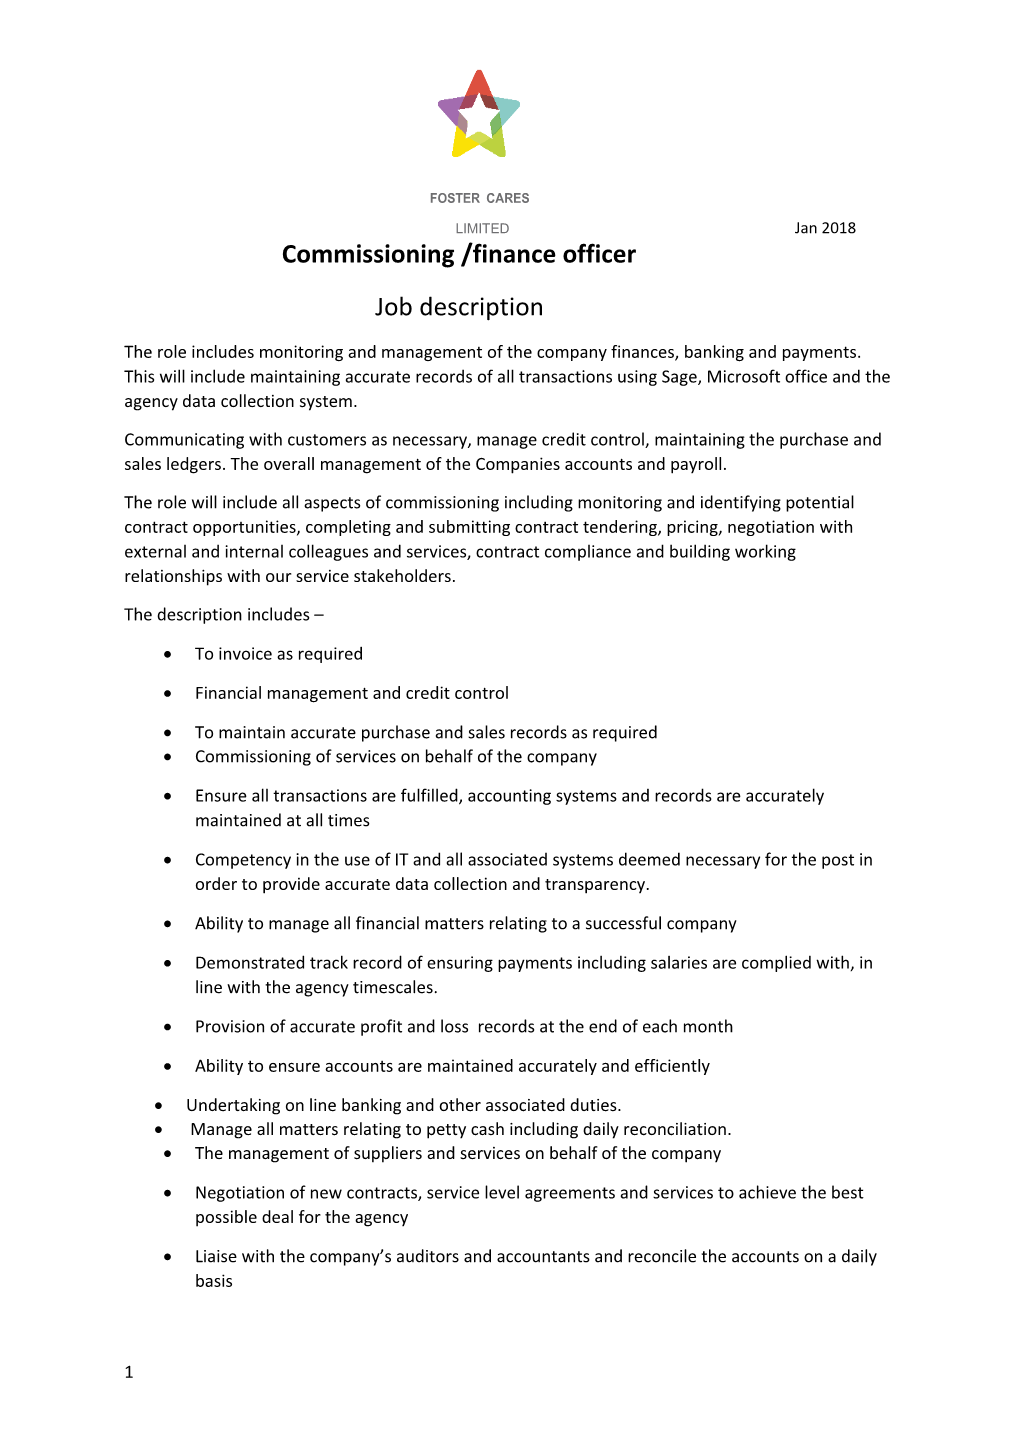 Commissioning /Finance Officer